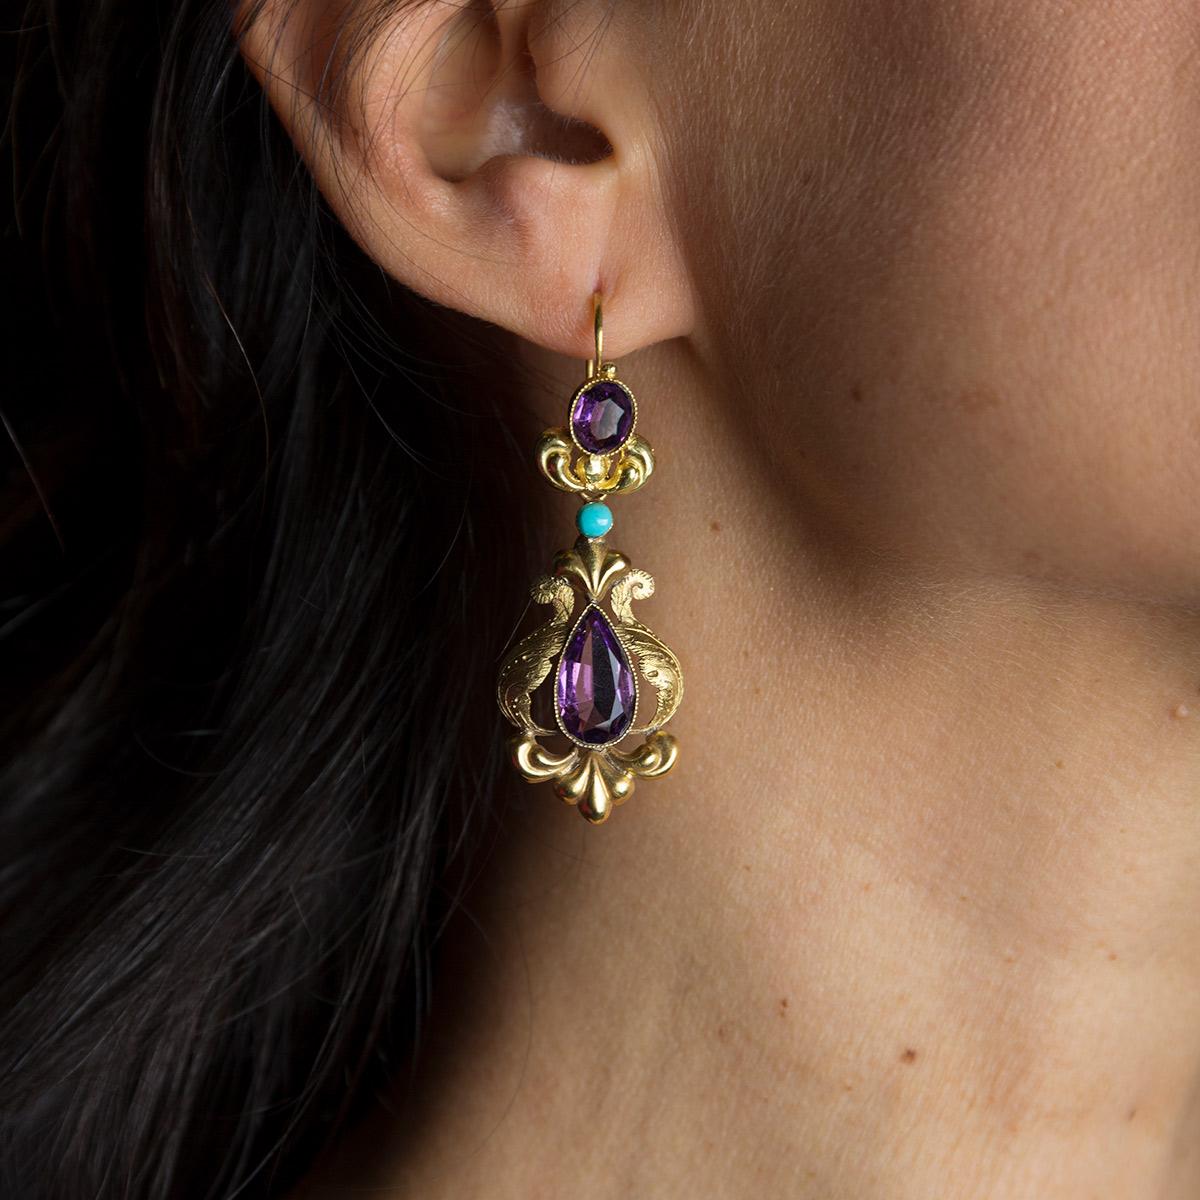 Early 1900s 18 kt yellow gold antique earrings with amethysts and turquoise from Sicily.
This jewel is a unique opportunity to relive an emotion of the past in the wake of timeless elegance. 
Behind every antique jewel symbol of charm and